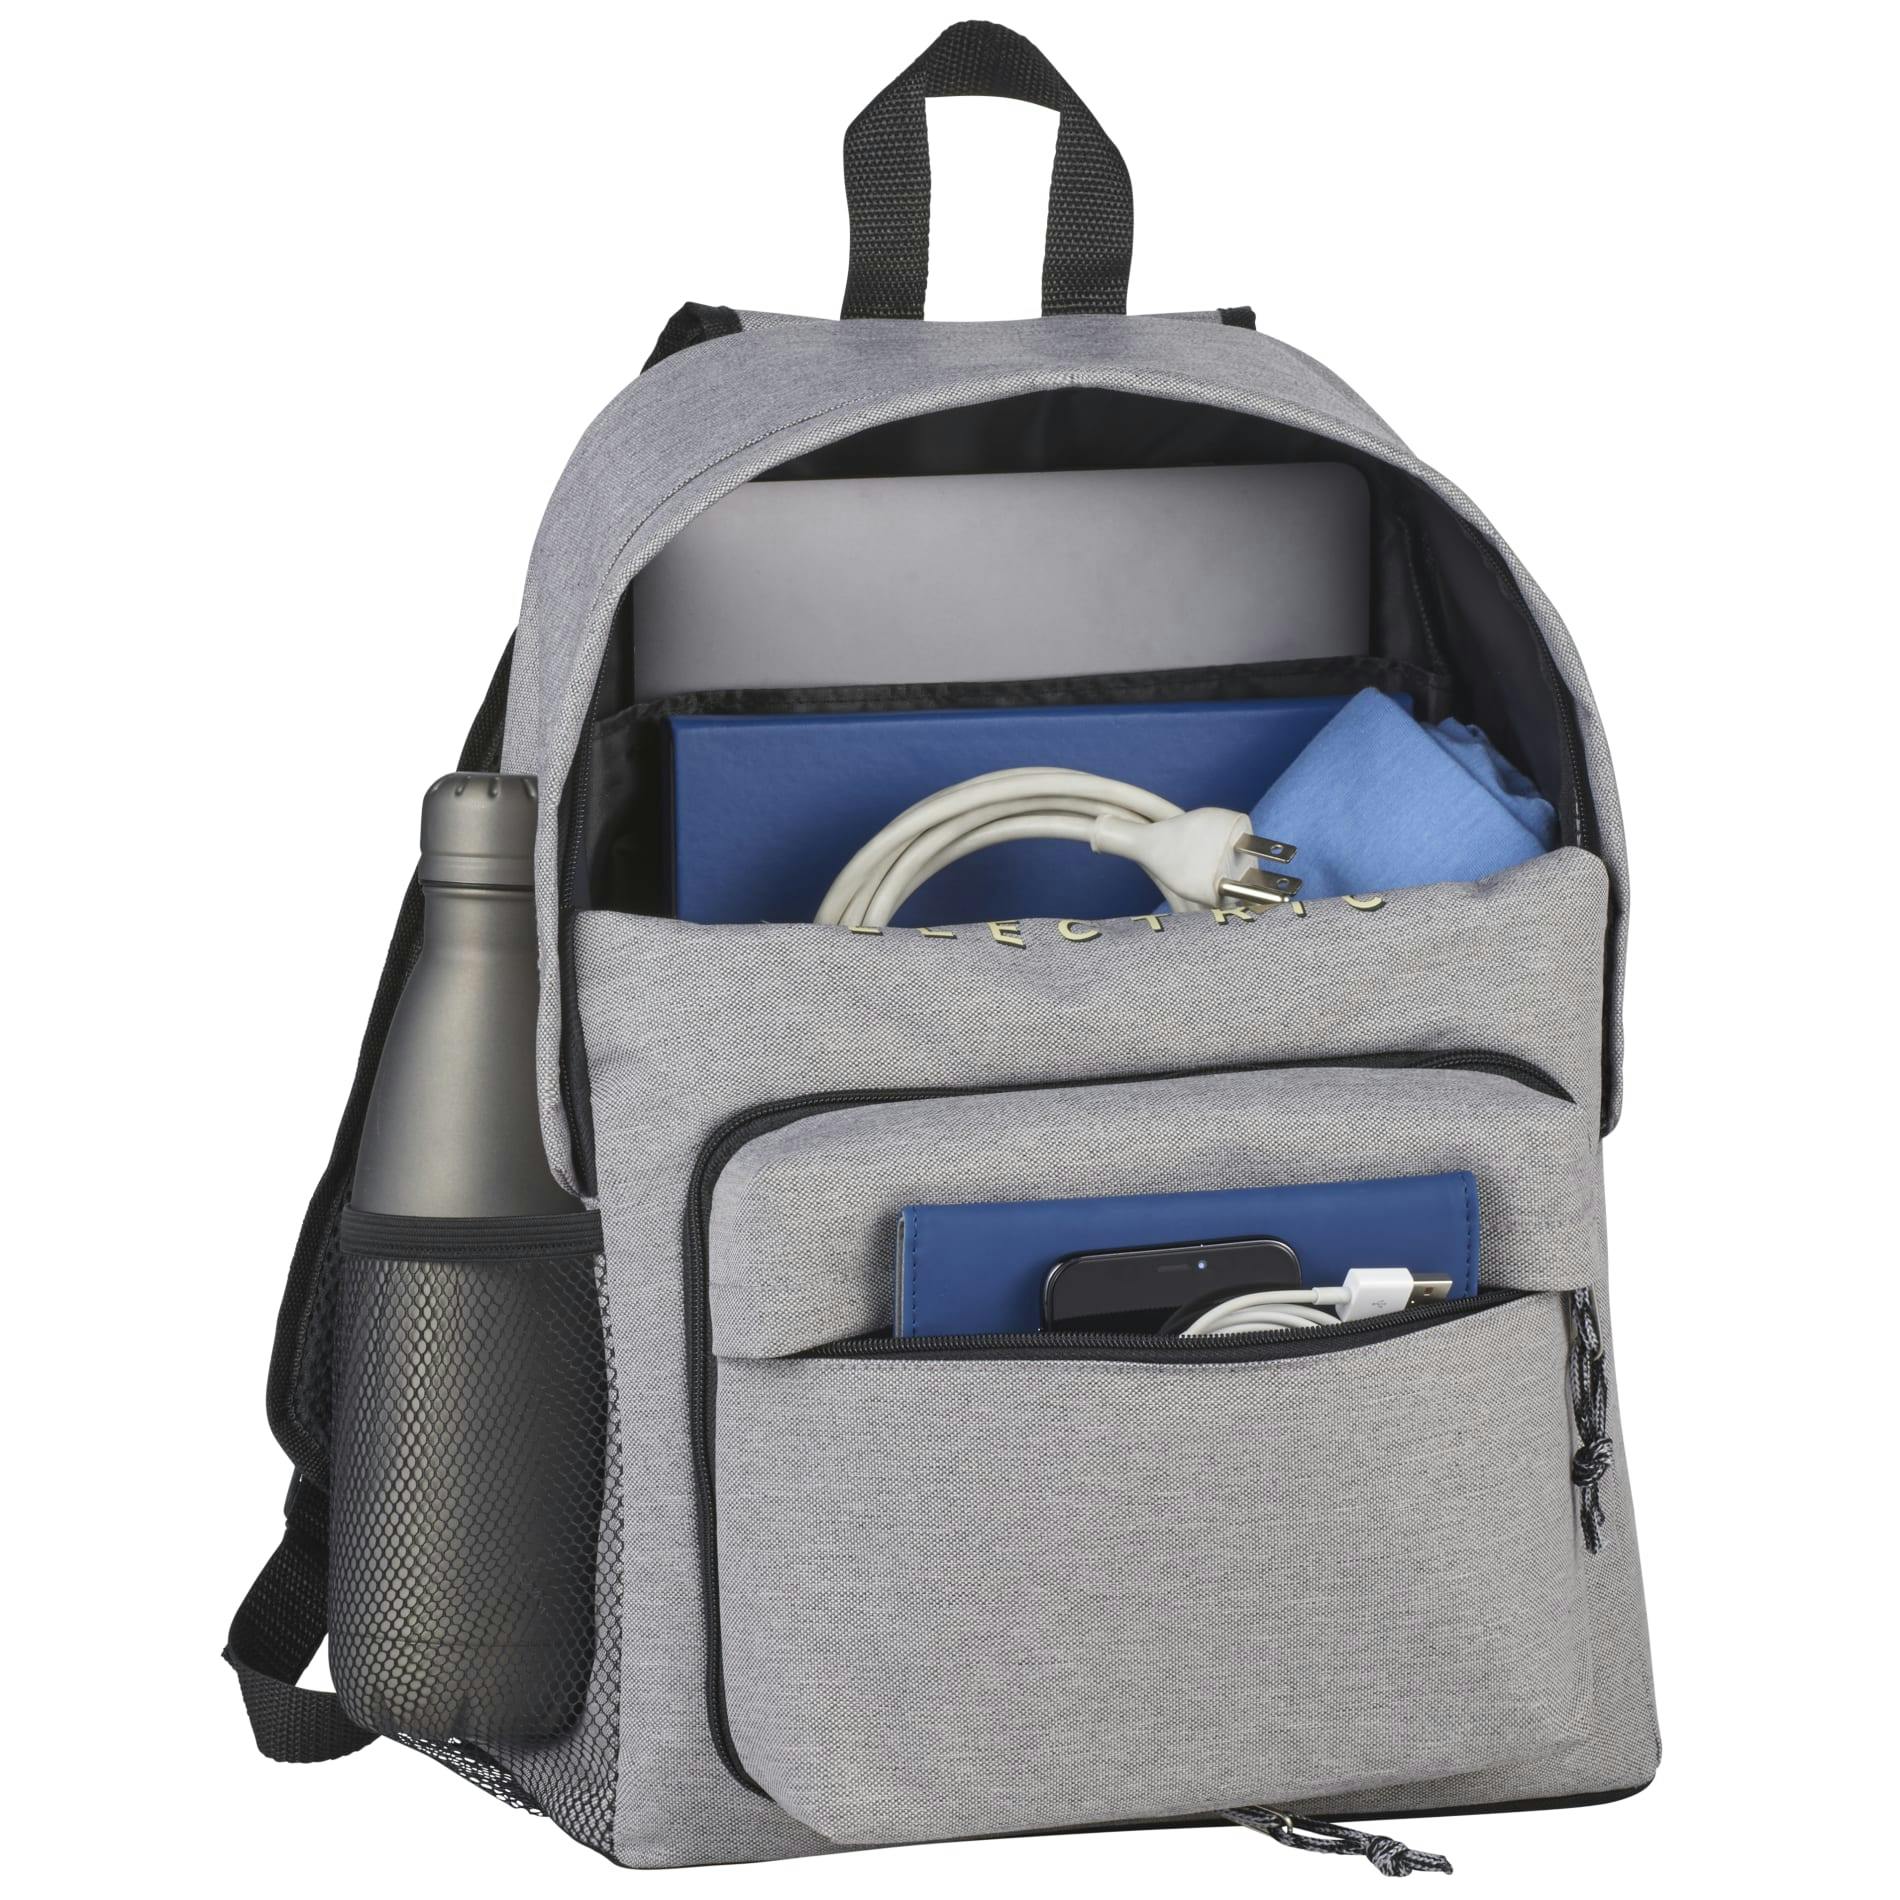 Merchant & Craft Revive RPET Waist Pack Backpack - additional Image 2